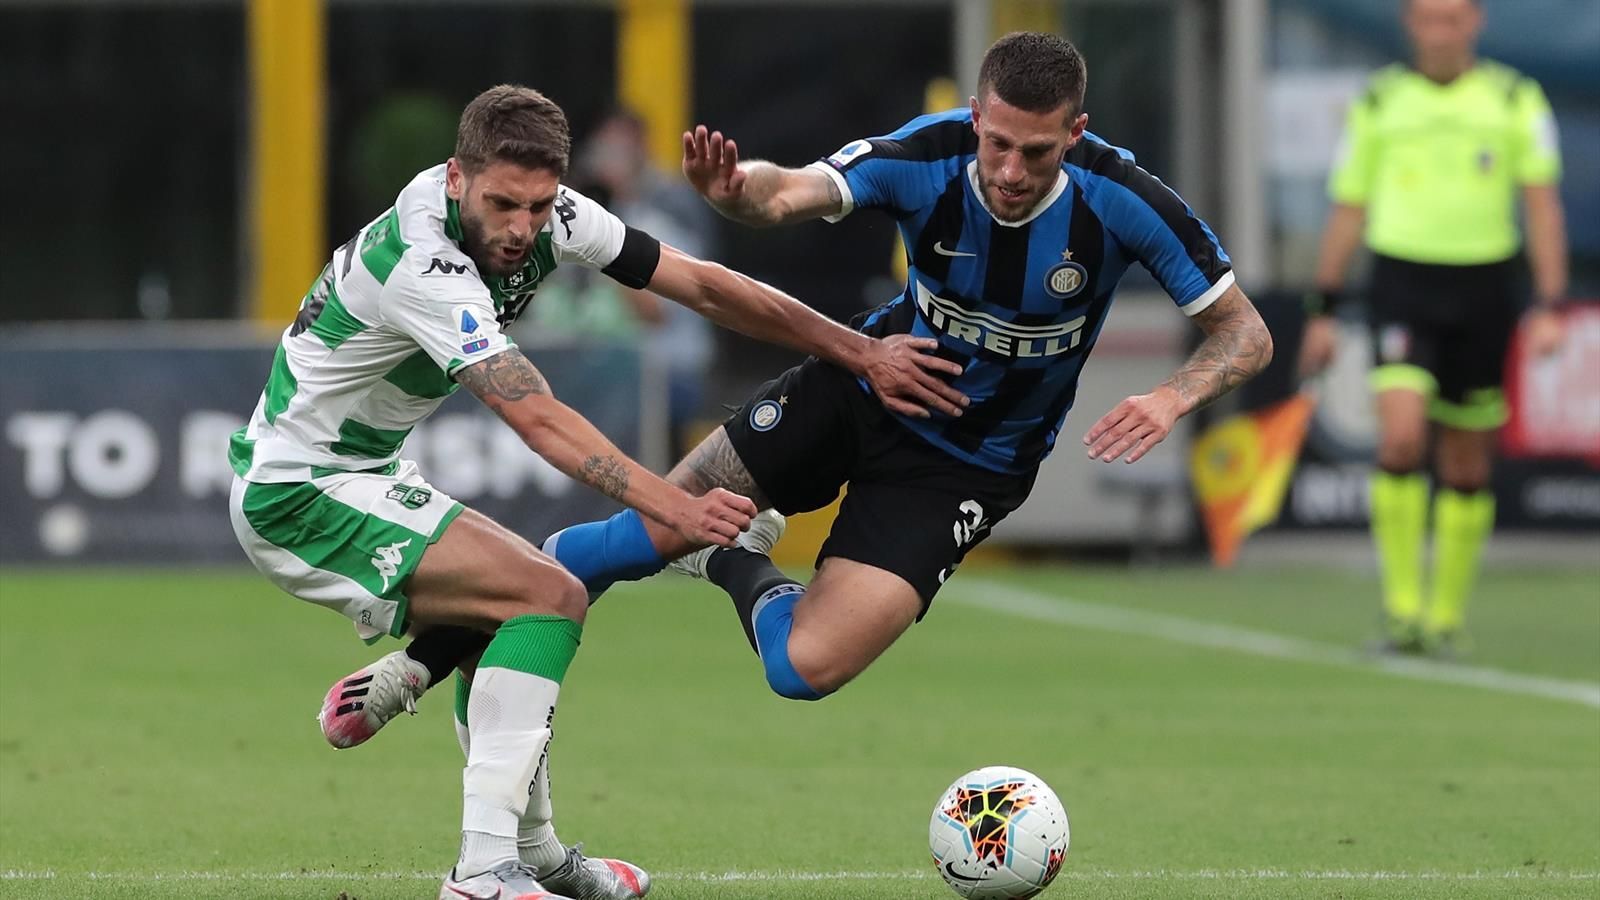 Inter and Sassuolo played a 3-3 draw